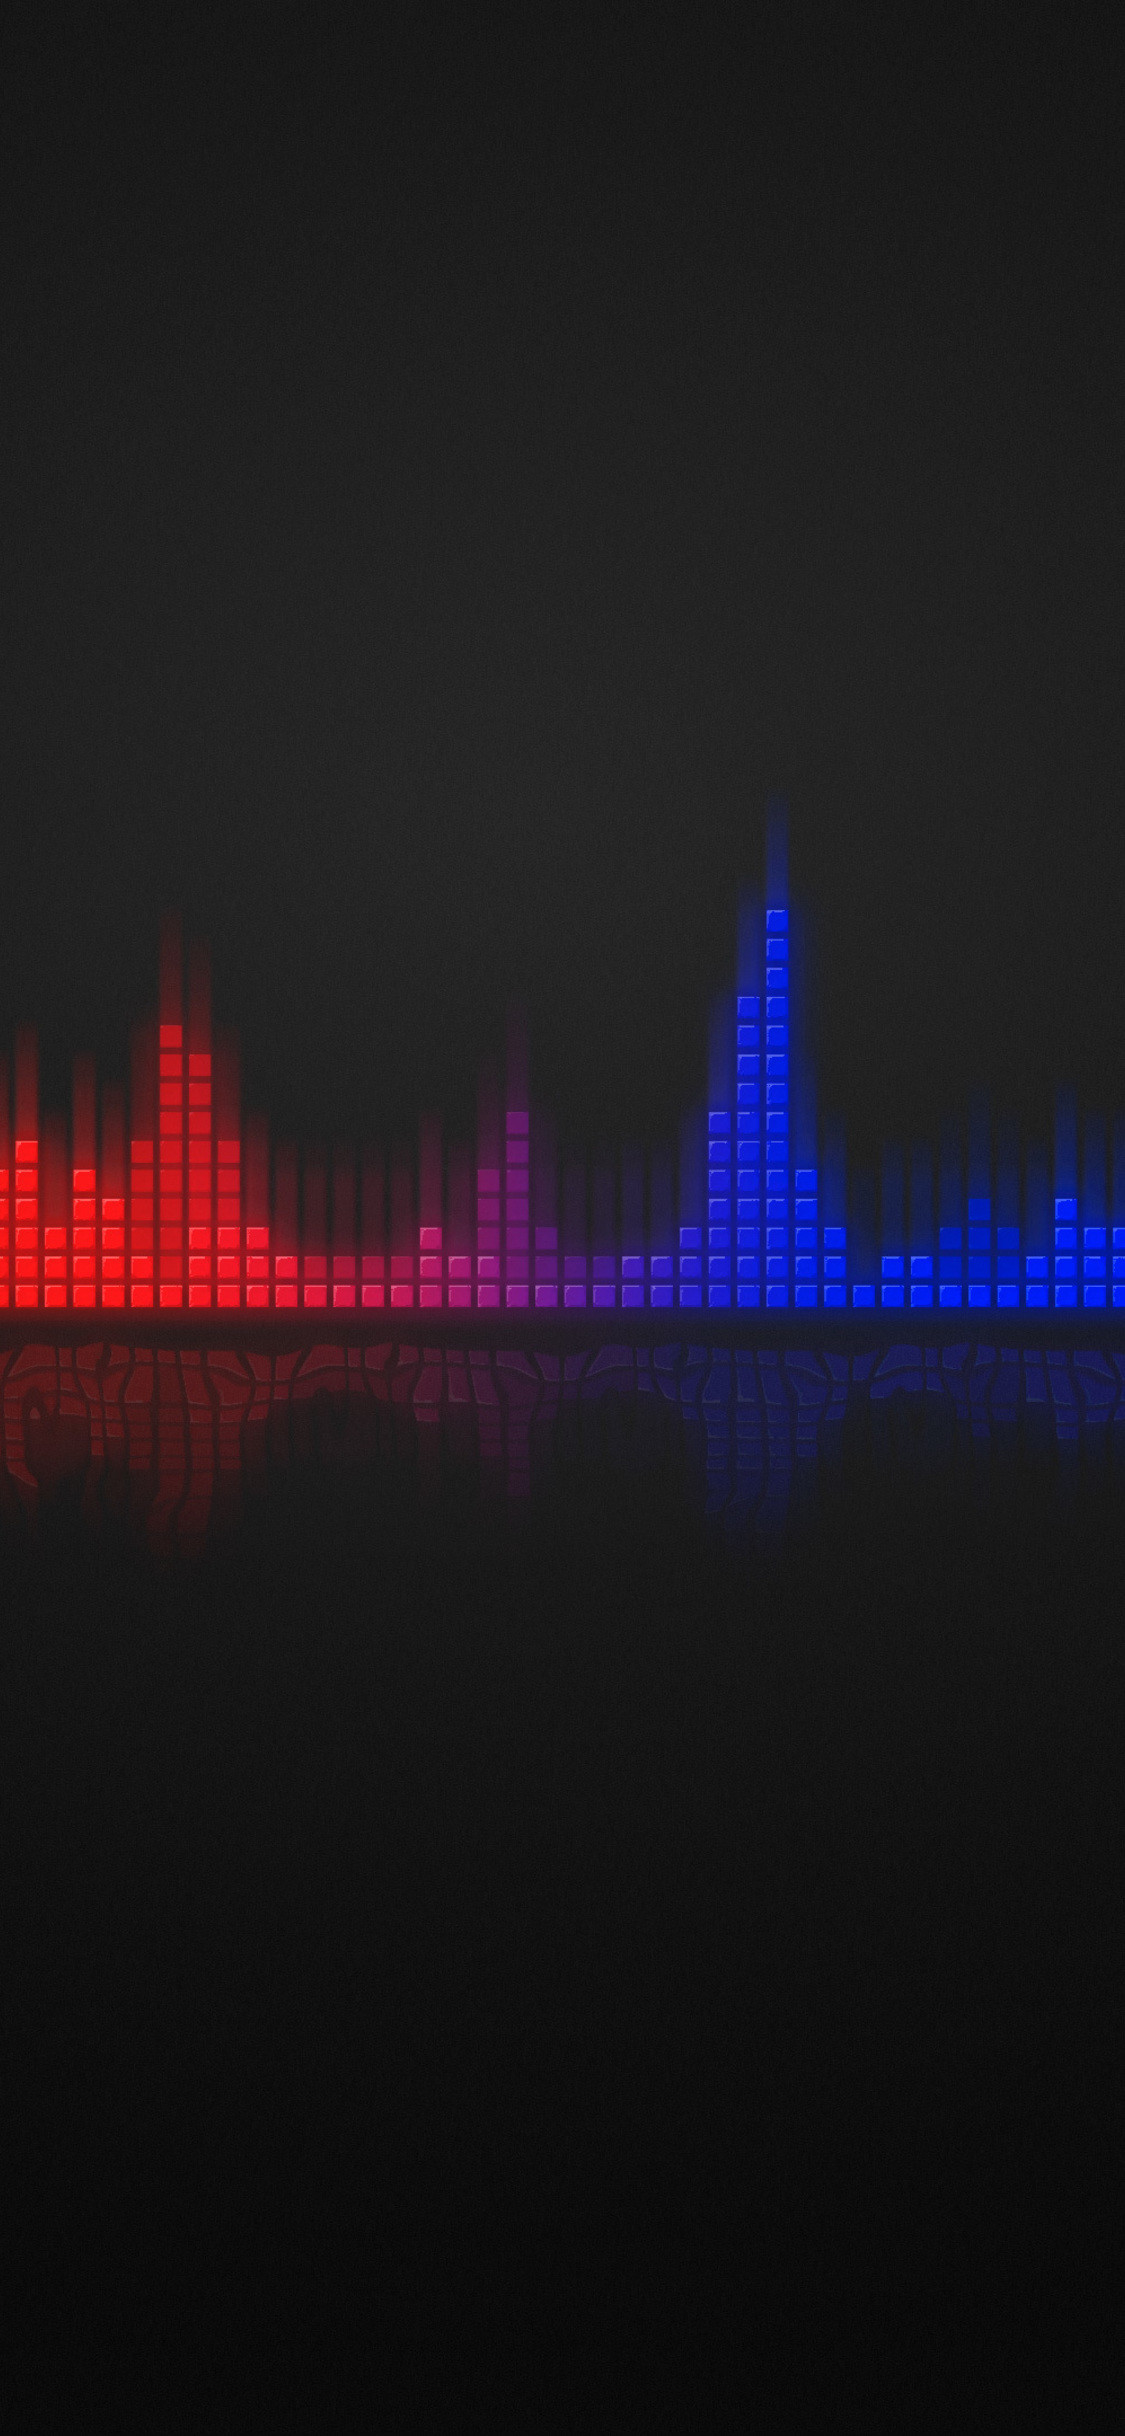 Music Live Wallpaper For Android Equalizer